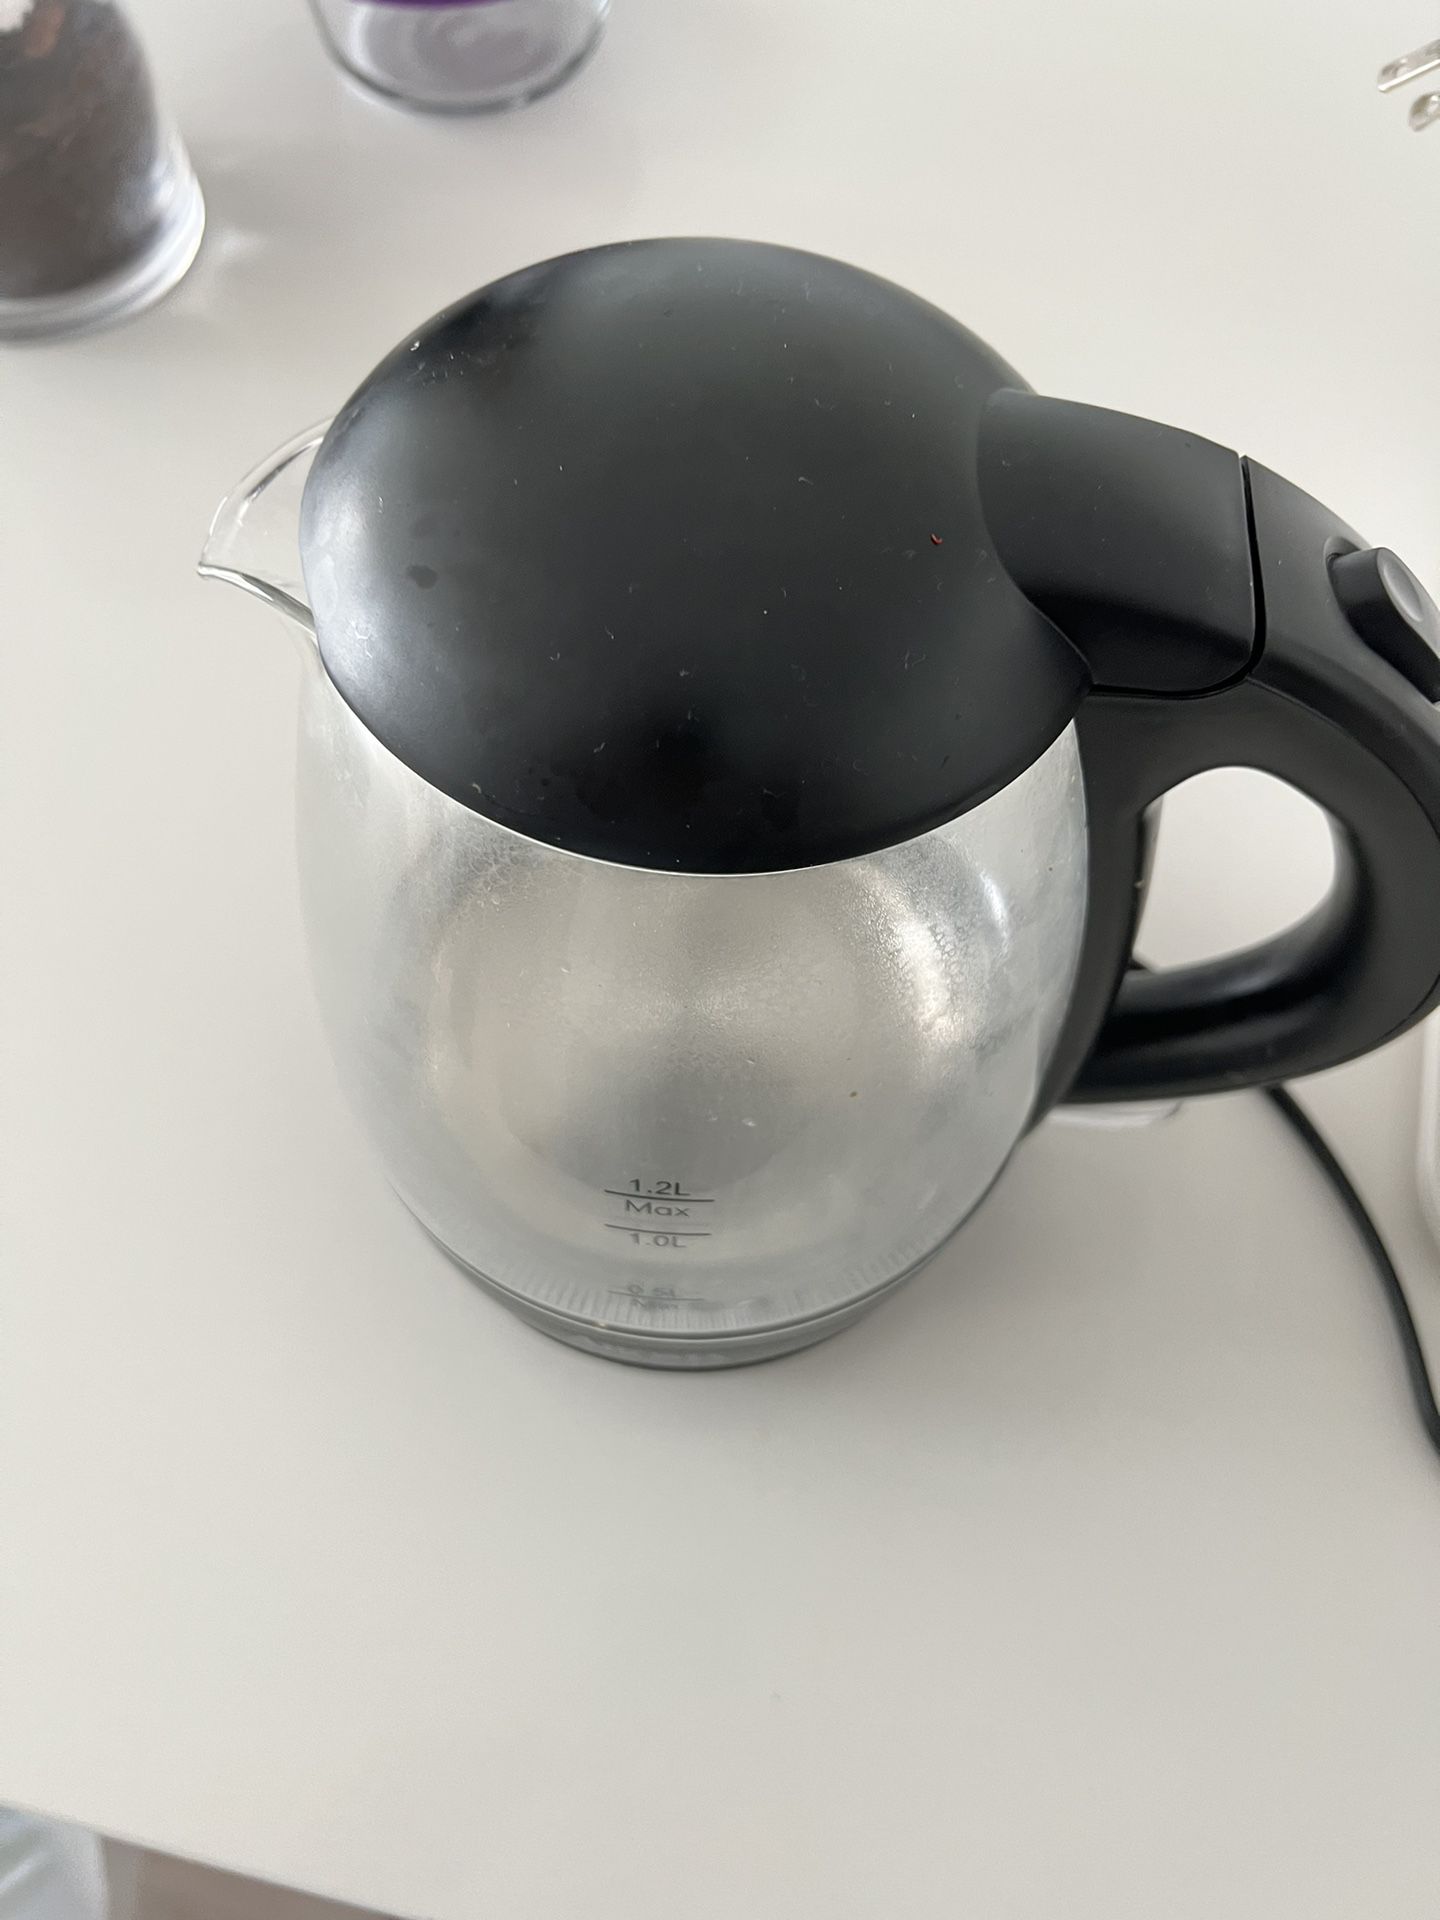 Aroma 1.2L Glass Kettle